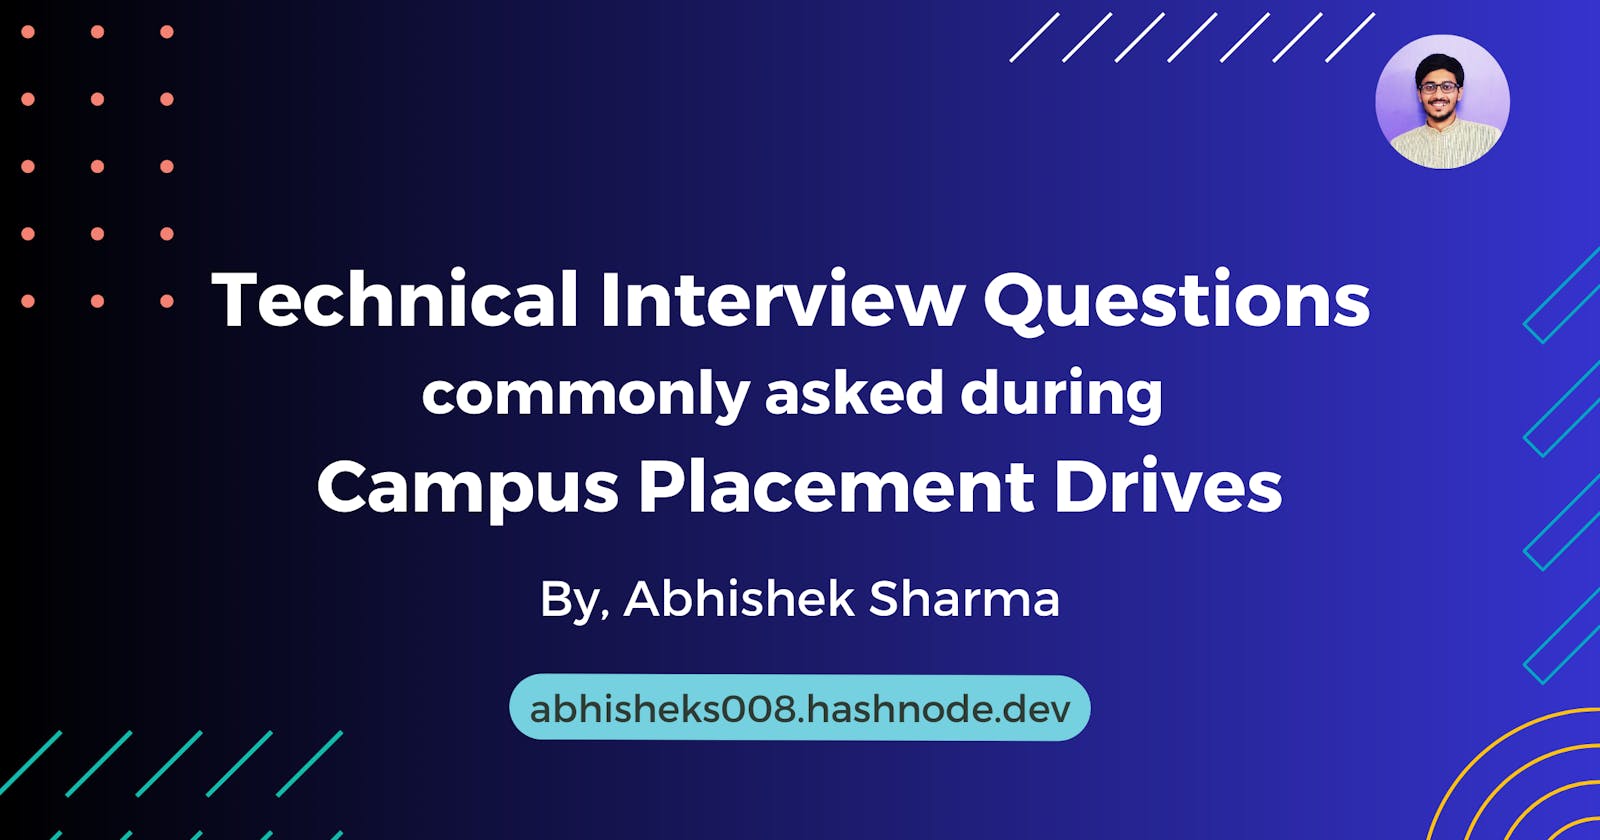 Technical Interview Questions commonly asked during Campus Placement Drives